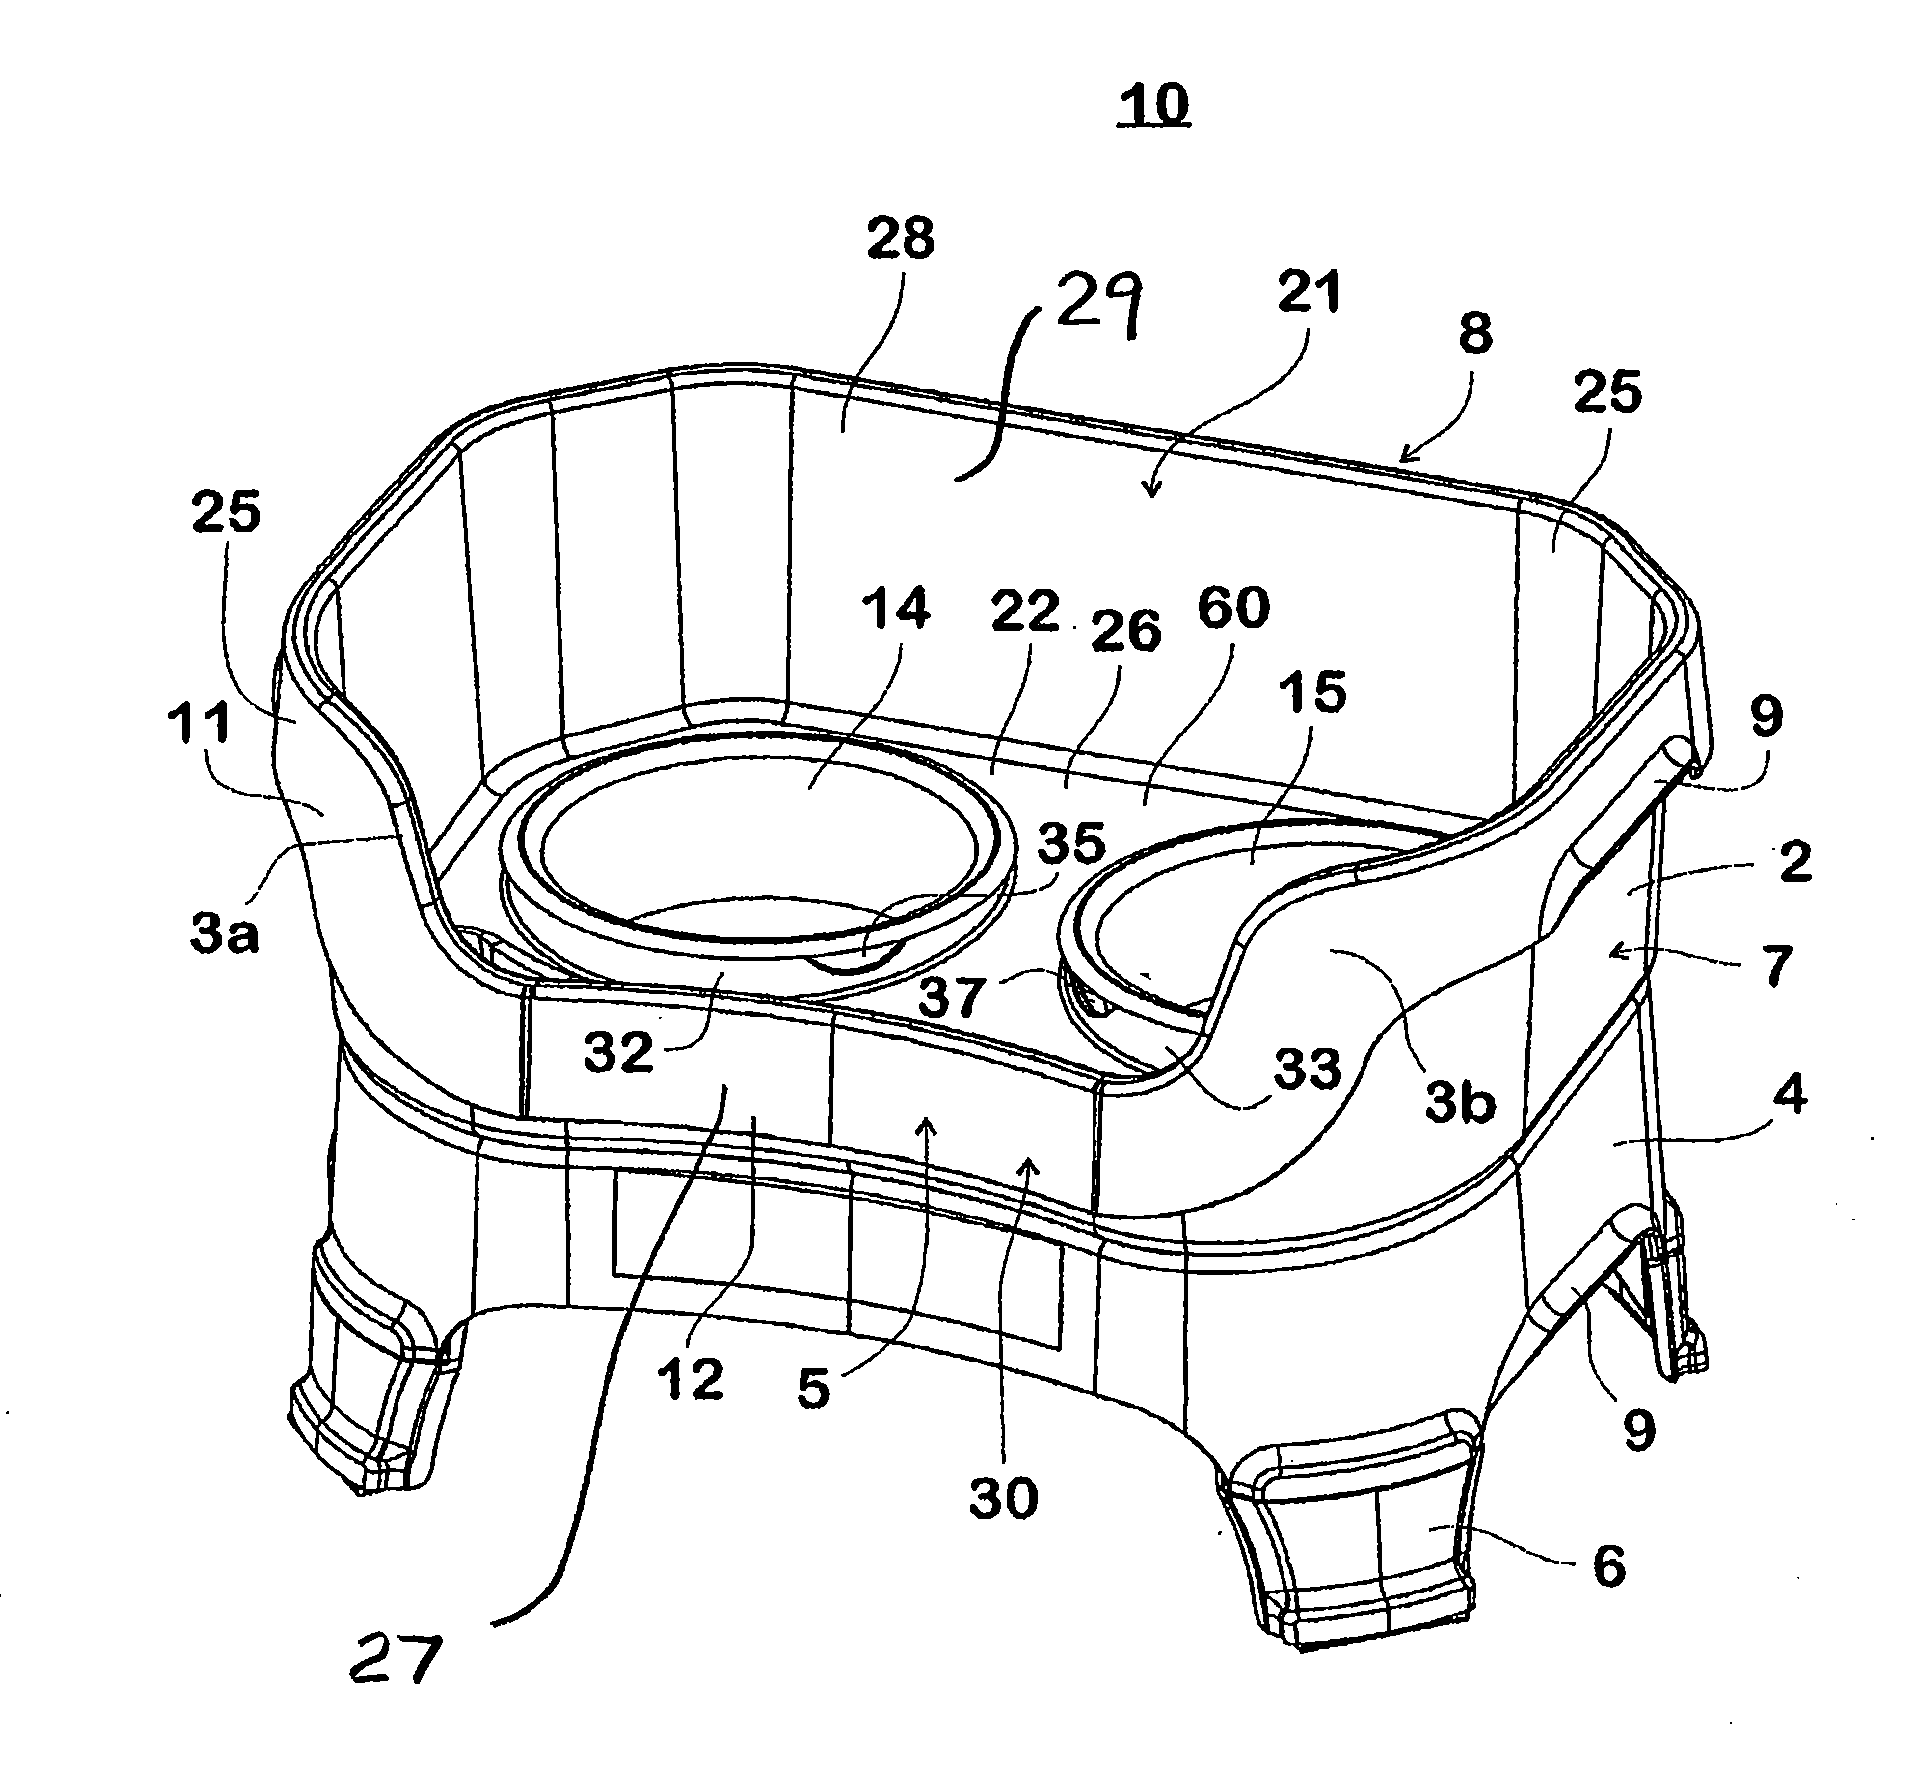 Pet feeding system and method for collecting spilled food and water